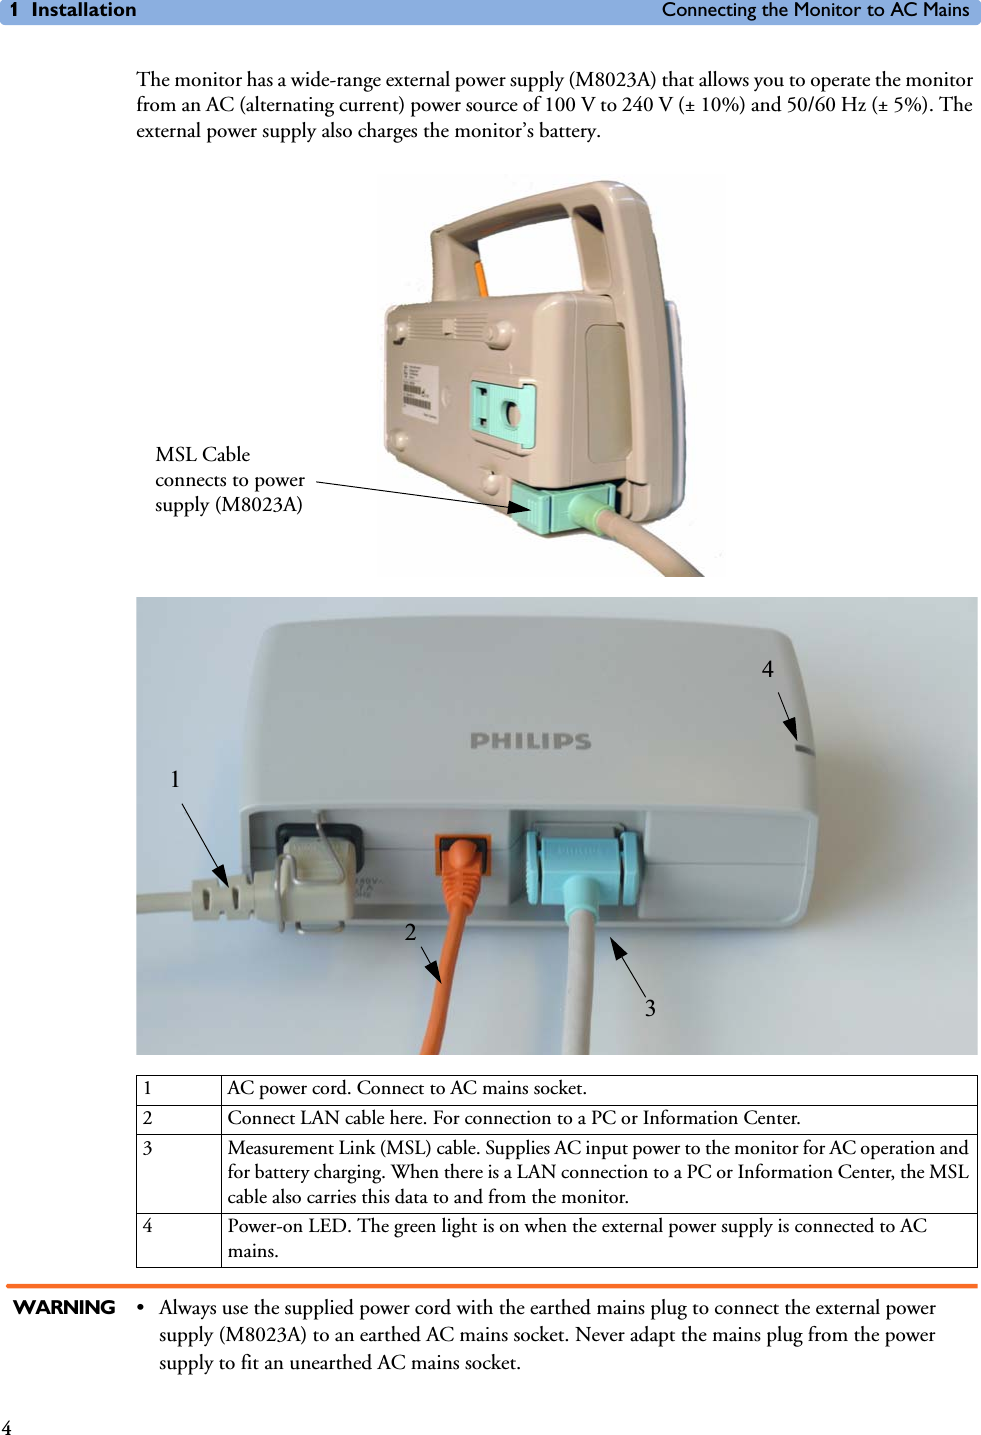 1 Installation Connecting the Monitor to AC Mains4The monitor has a wide-range external power supply (M8023A) that allows you to operate the monitor from an AC (alternating current) power source of 100 V to 240 V (± 10%) and 50/60 Hz (± 5%). The external power supply also charges the monitor’s battery. WARNING • Always use the supplied power cord with the earthed mains plug to connect the external power supply (M8023A) to an earthed AC mains socket. Never adapt the mains plug from the power supply to fit an unearthed AC mains socket.1 AC power cord. Connect to AC mains socket.2 Connect LAN cable here. For connection to a PC or Information Center.3 Measurement Link (MSL) cable. Supplies AC input power to the monitor for AC operation and for battery charging. When there is a LAN connection to a PC or Information Center, the MSL cable also carries this data to and from the monitor.4 Power-on LED. The green light is on when the external power supply is connected to AC mains.MSL Cable connects to power supply (M8023A)1342